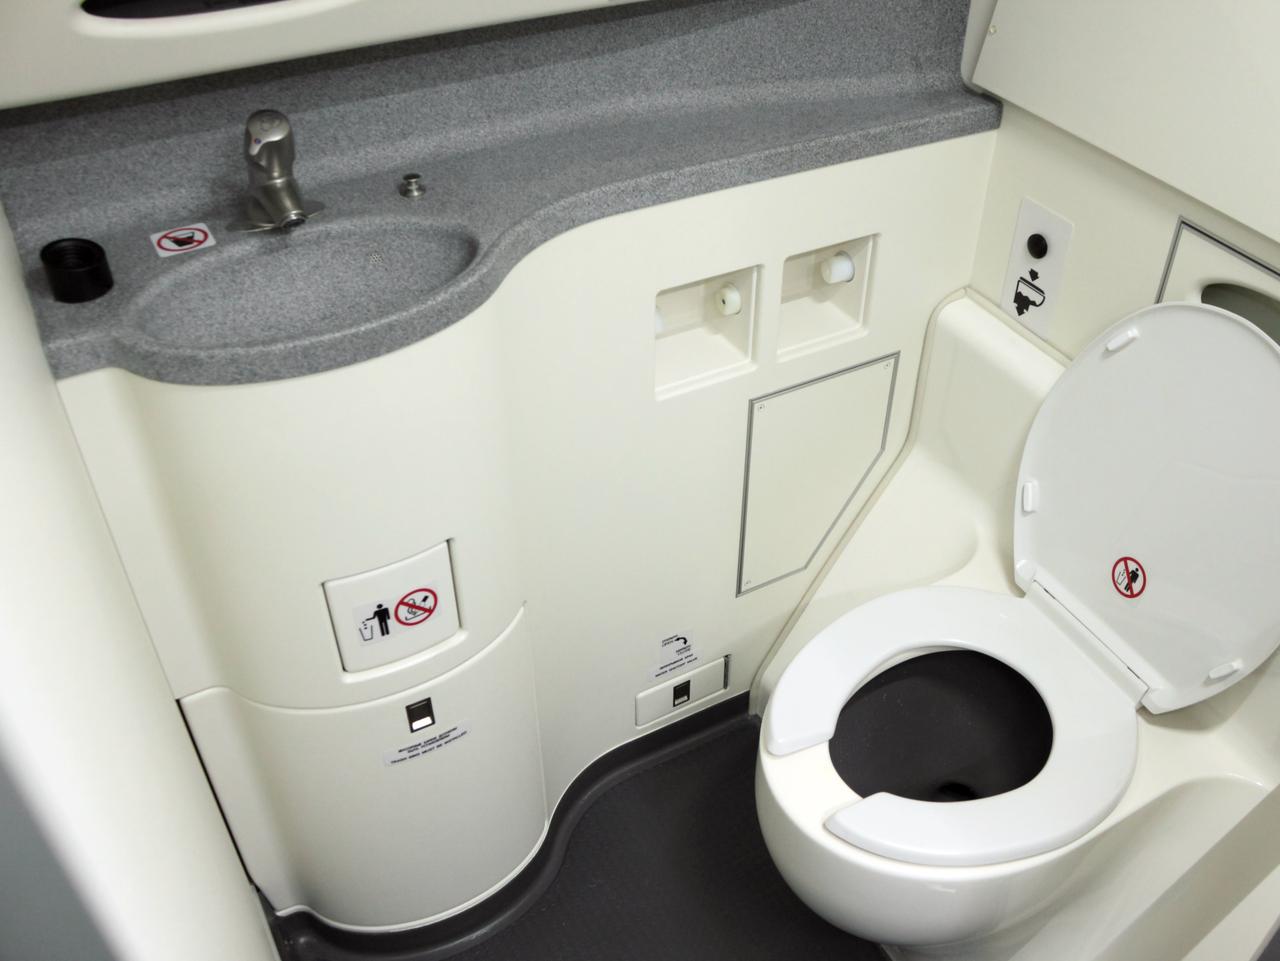 Toilet on board new aircraft.